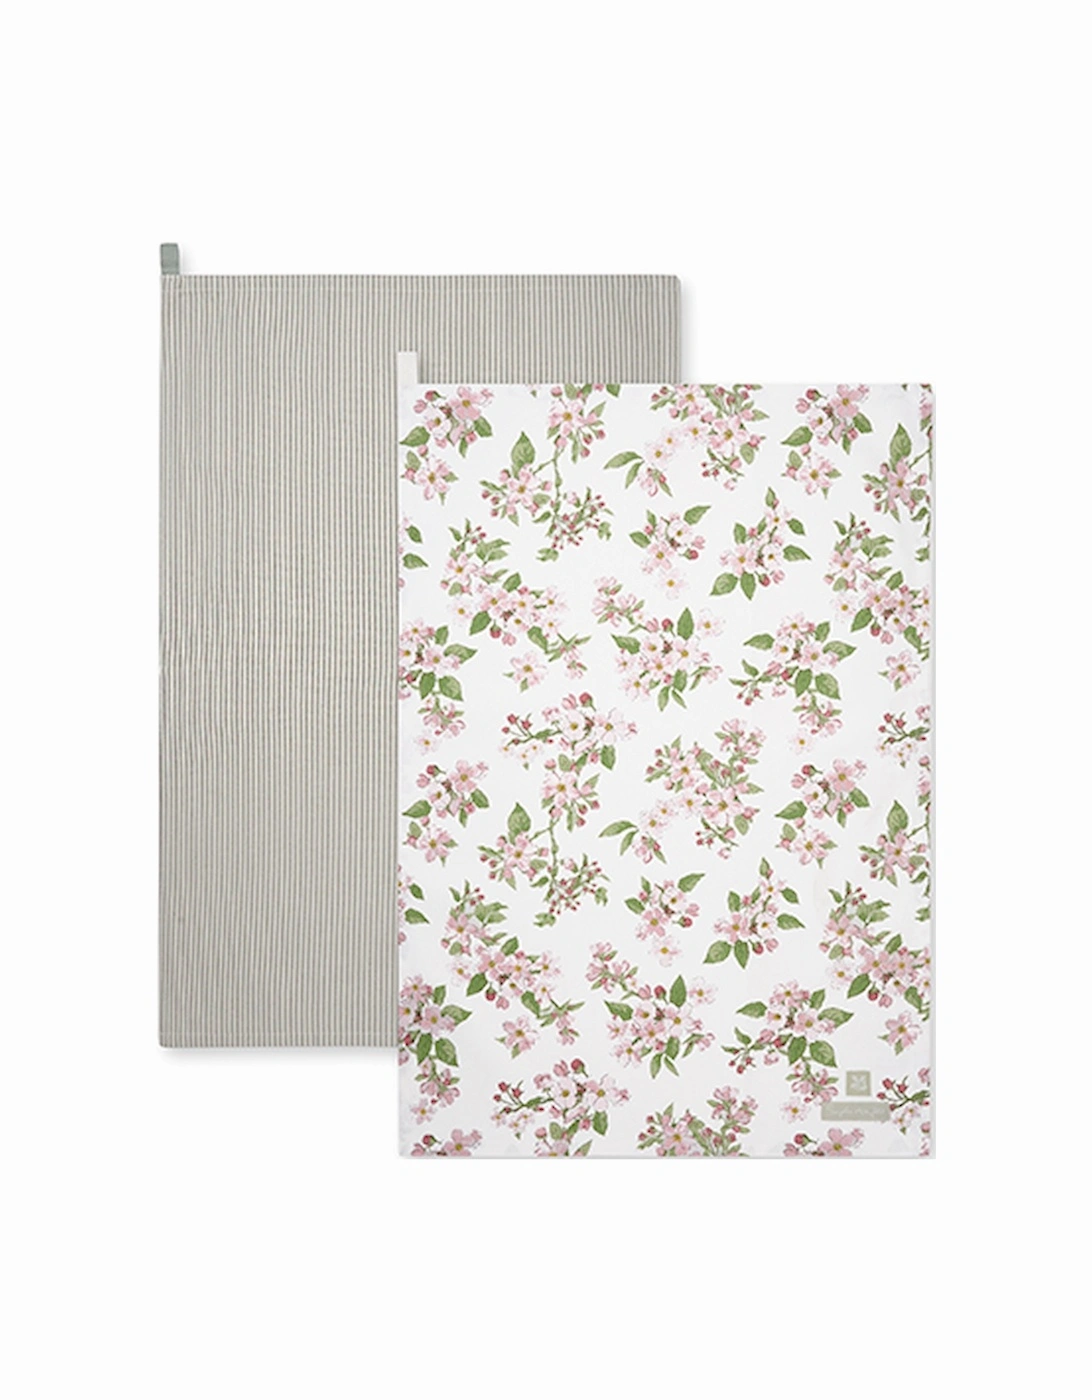 Set of Two Tea Towel Blossom and Stamford Stripe